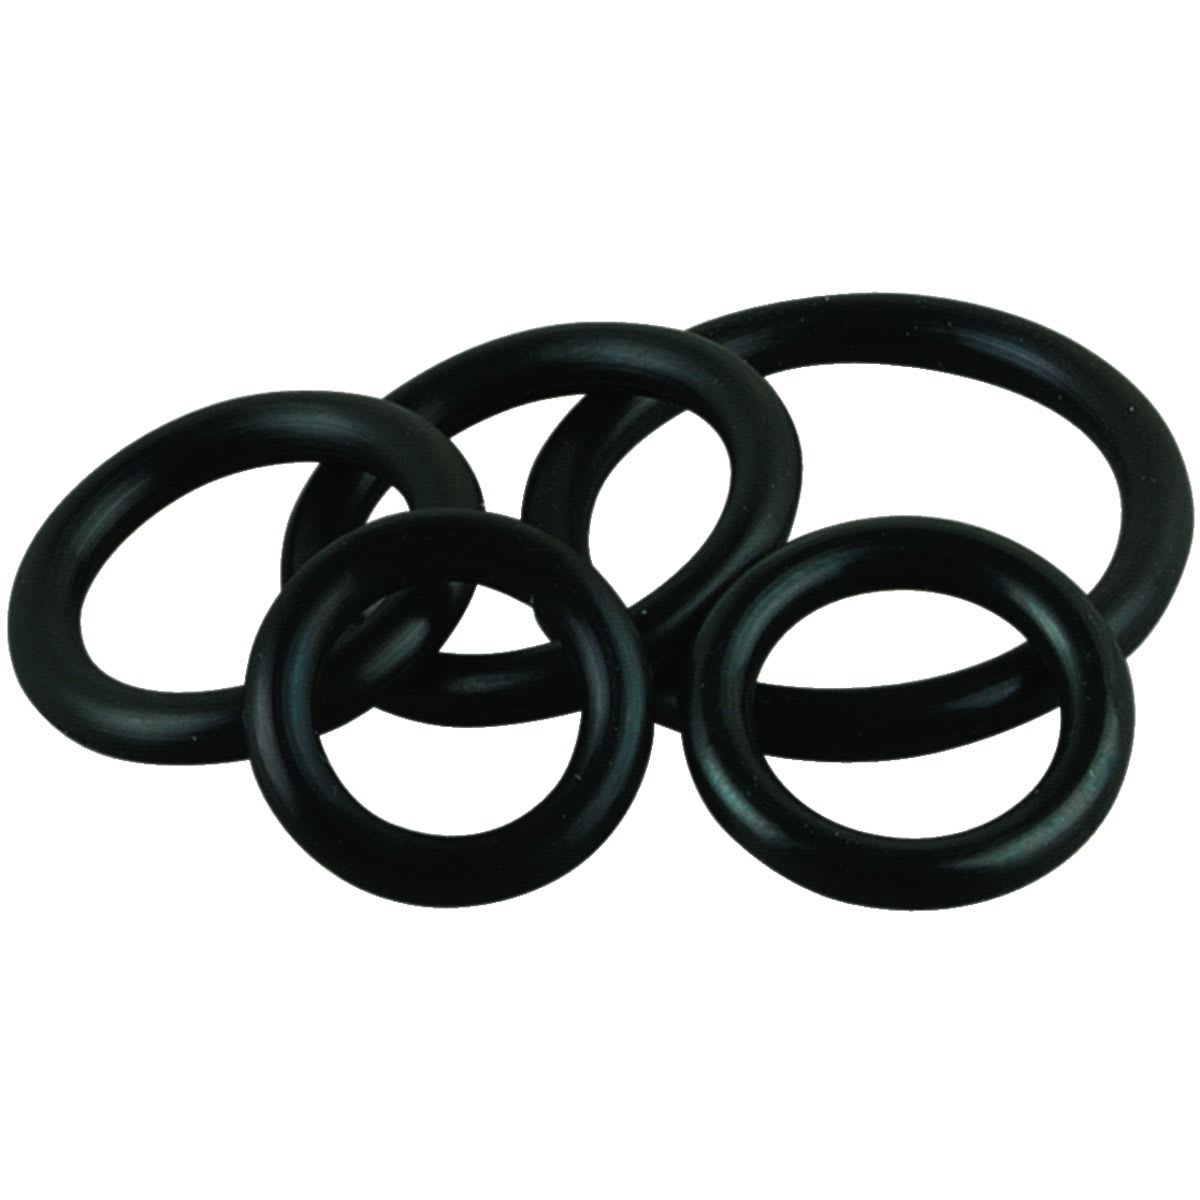 Primaflow Assorted O Rings 2.4mm Selection Pack